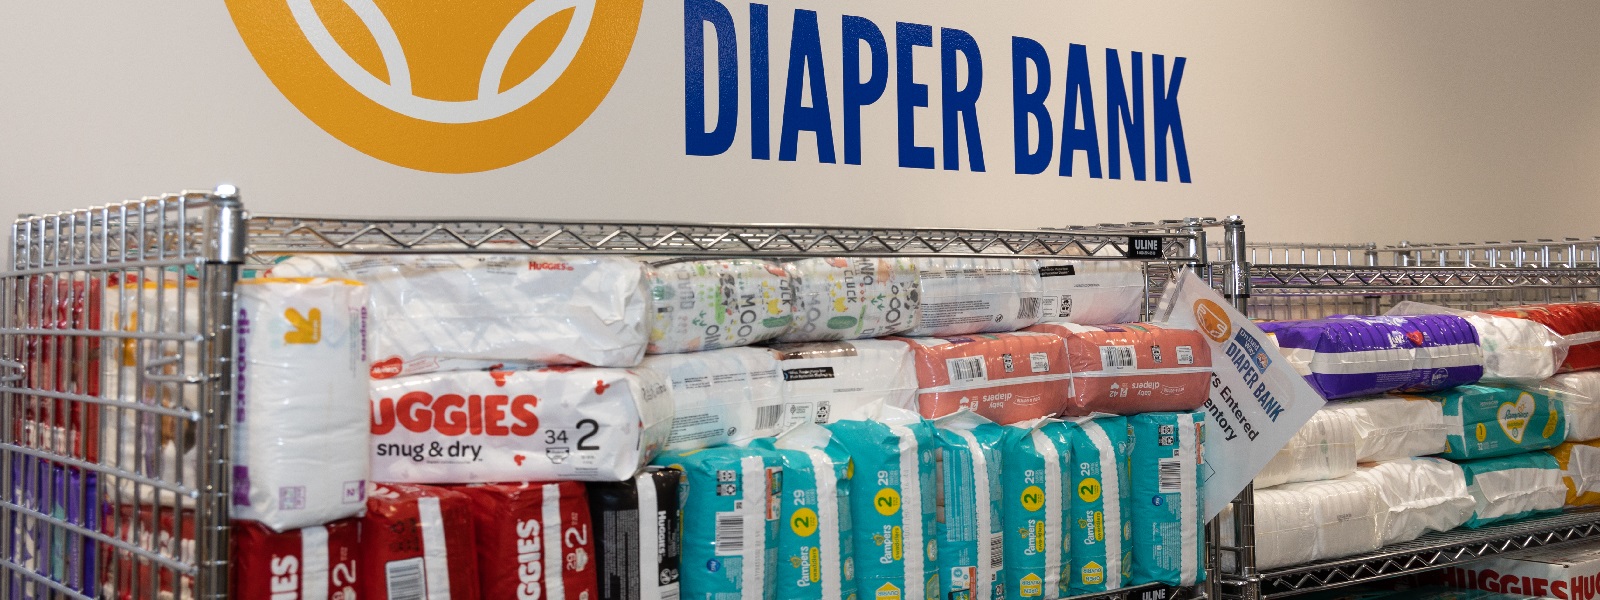 Diapers at United Way's Diaper Bank